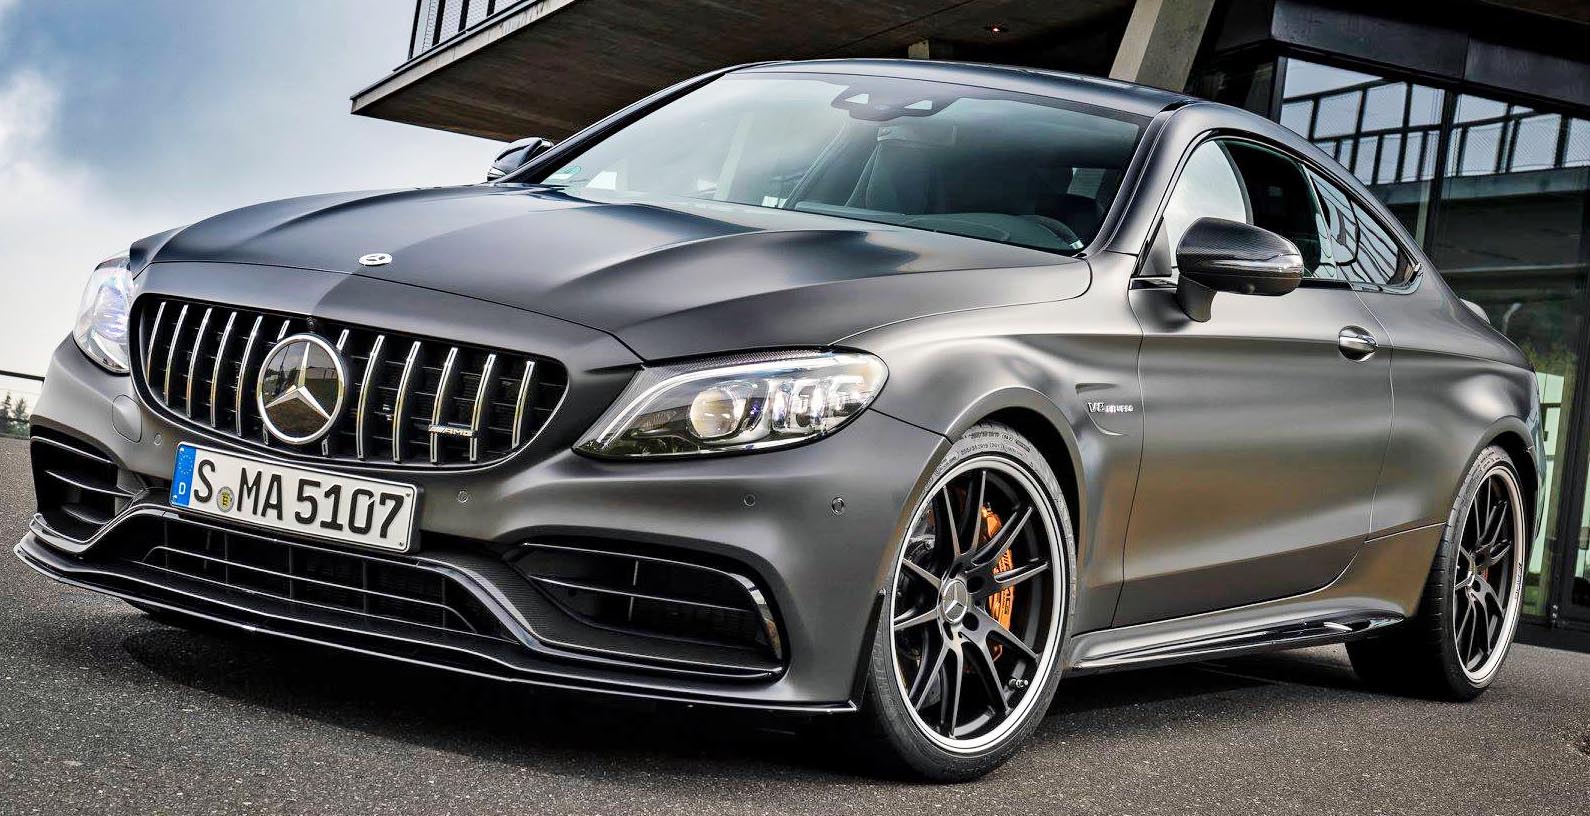 Mercedes-Benz C63 S AMG Coupe (W206)